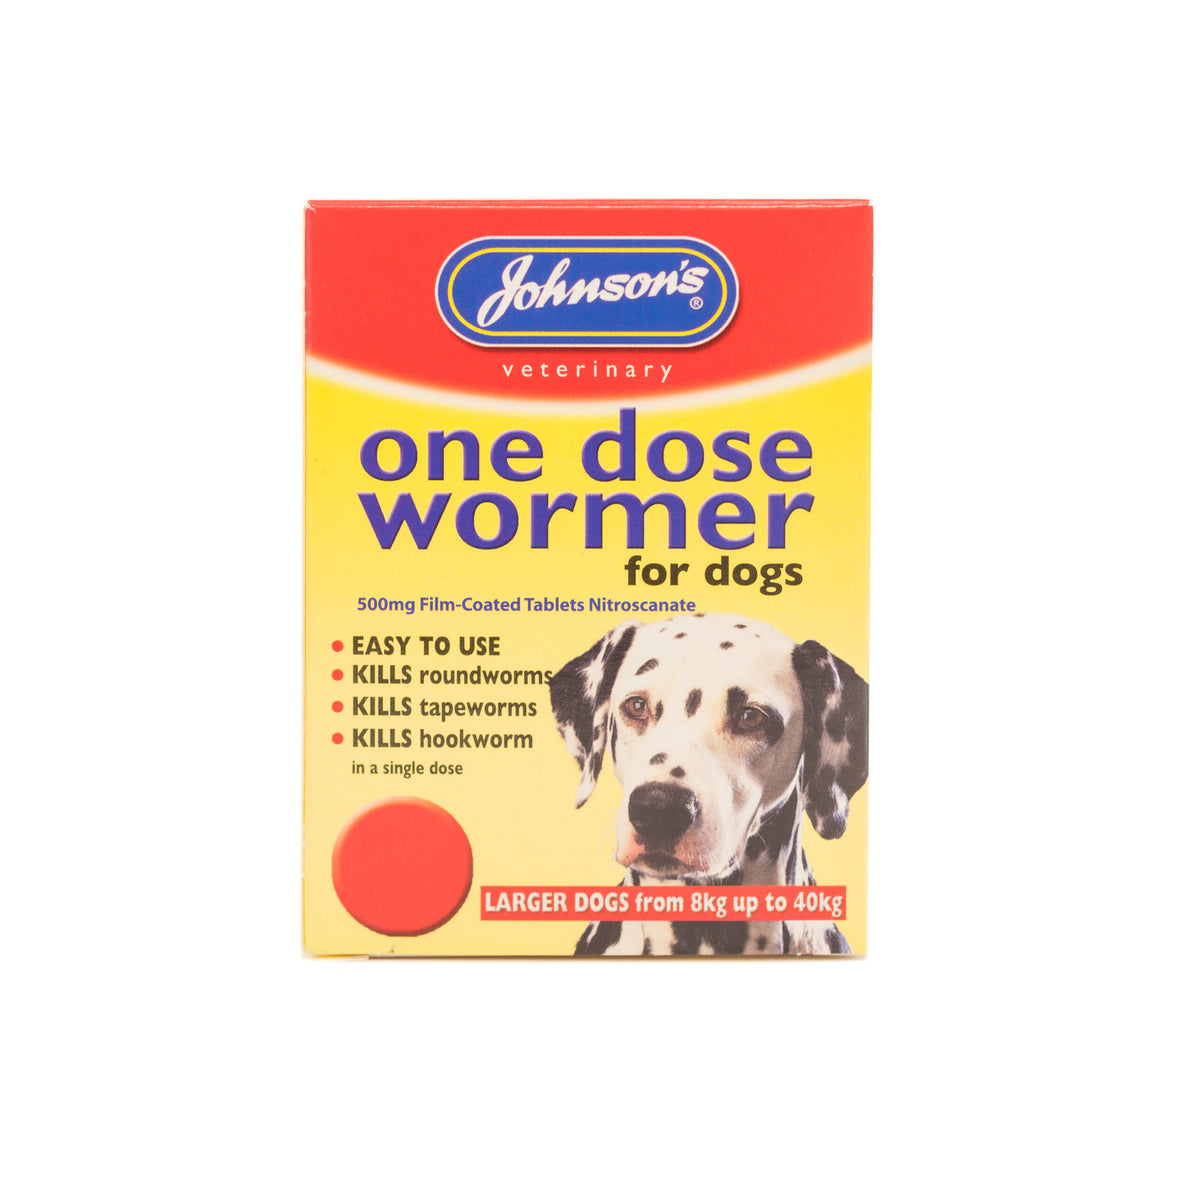 Johnsons Worming Tablets